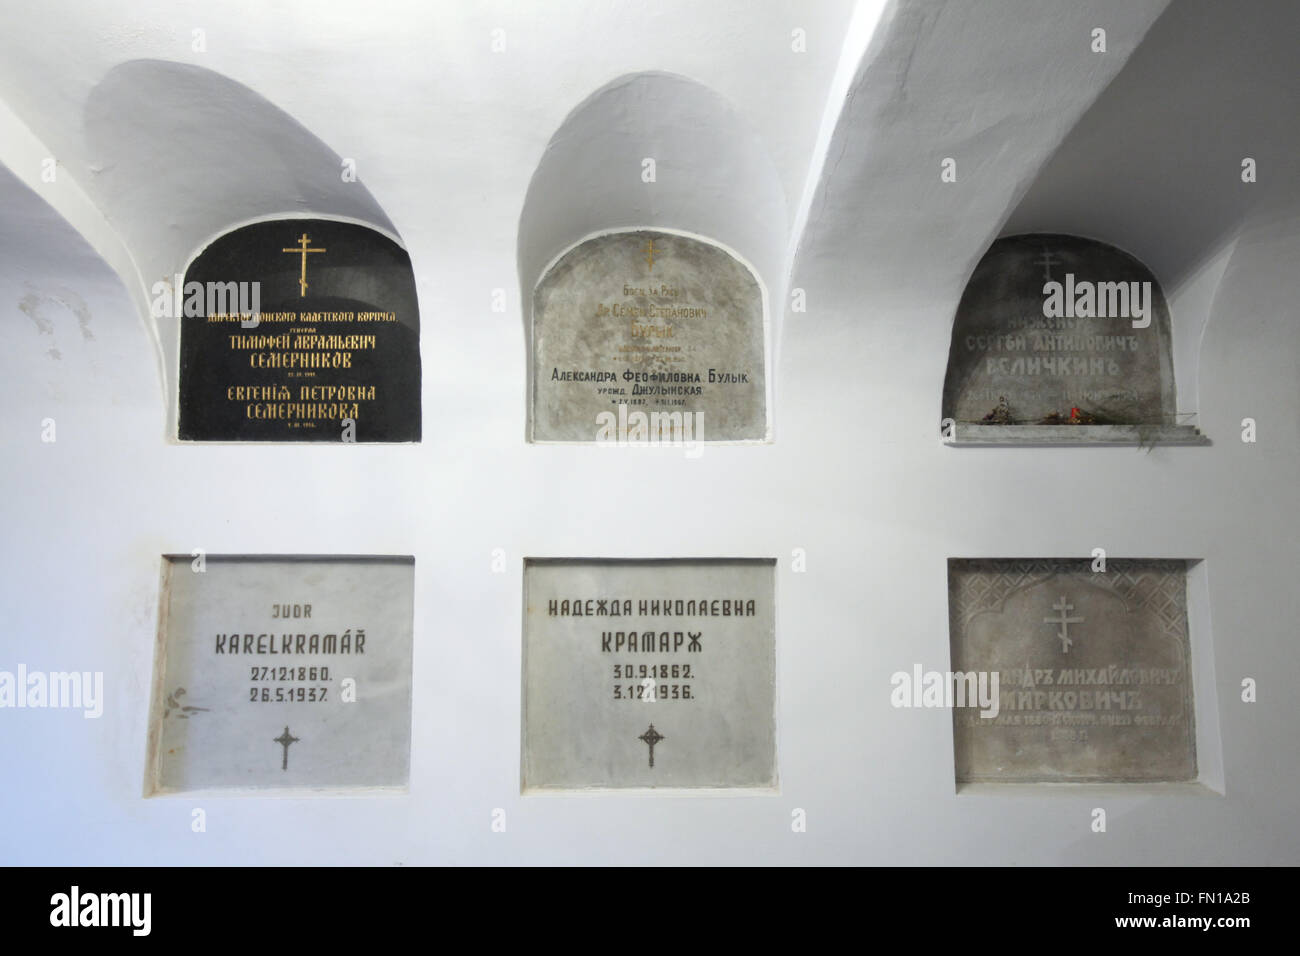 Graves of Karel Kramar, the first Prime Minister of Czechoslovakia, and his Russian wife Nadezhda Kramar in the underground crypt of the Dormition Church at the Olsany Cemetery in Prague, Czech Republic. Karel Kramar, born on December 17, 1860, was a Czech (Bohemian) politician and the first Prime Minister of Czechoslovakia from November 1918 to July 1919. He died at age 76 on May 26, 1937, and was buried next to his Russian wife Nadezhda Kramar, who died five months earlier. Nadezhda Nikolayevna Kramar (Kramarova), nee Khludova, later Abrikosova after her first husband, was born on September Stock Photo